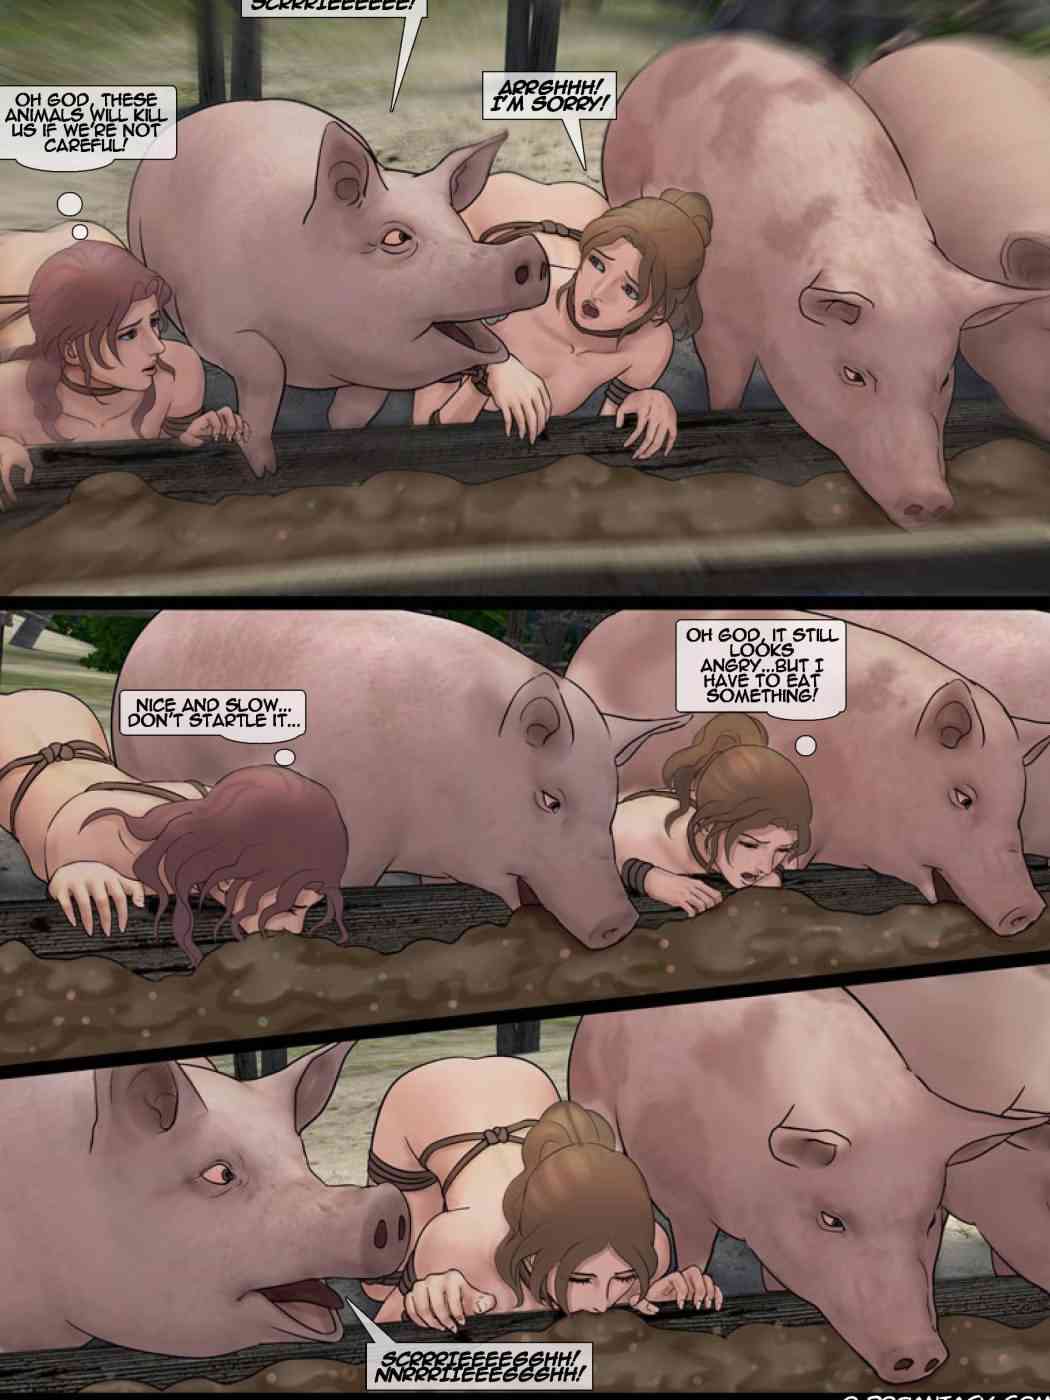 Girl having sex with pig